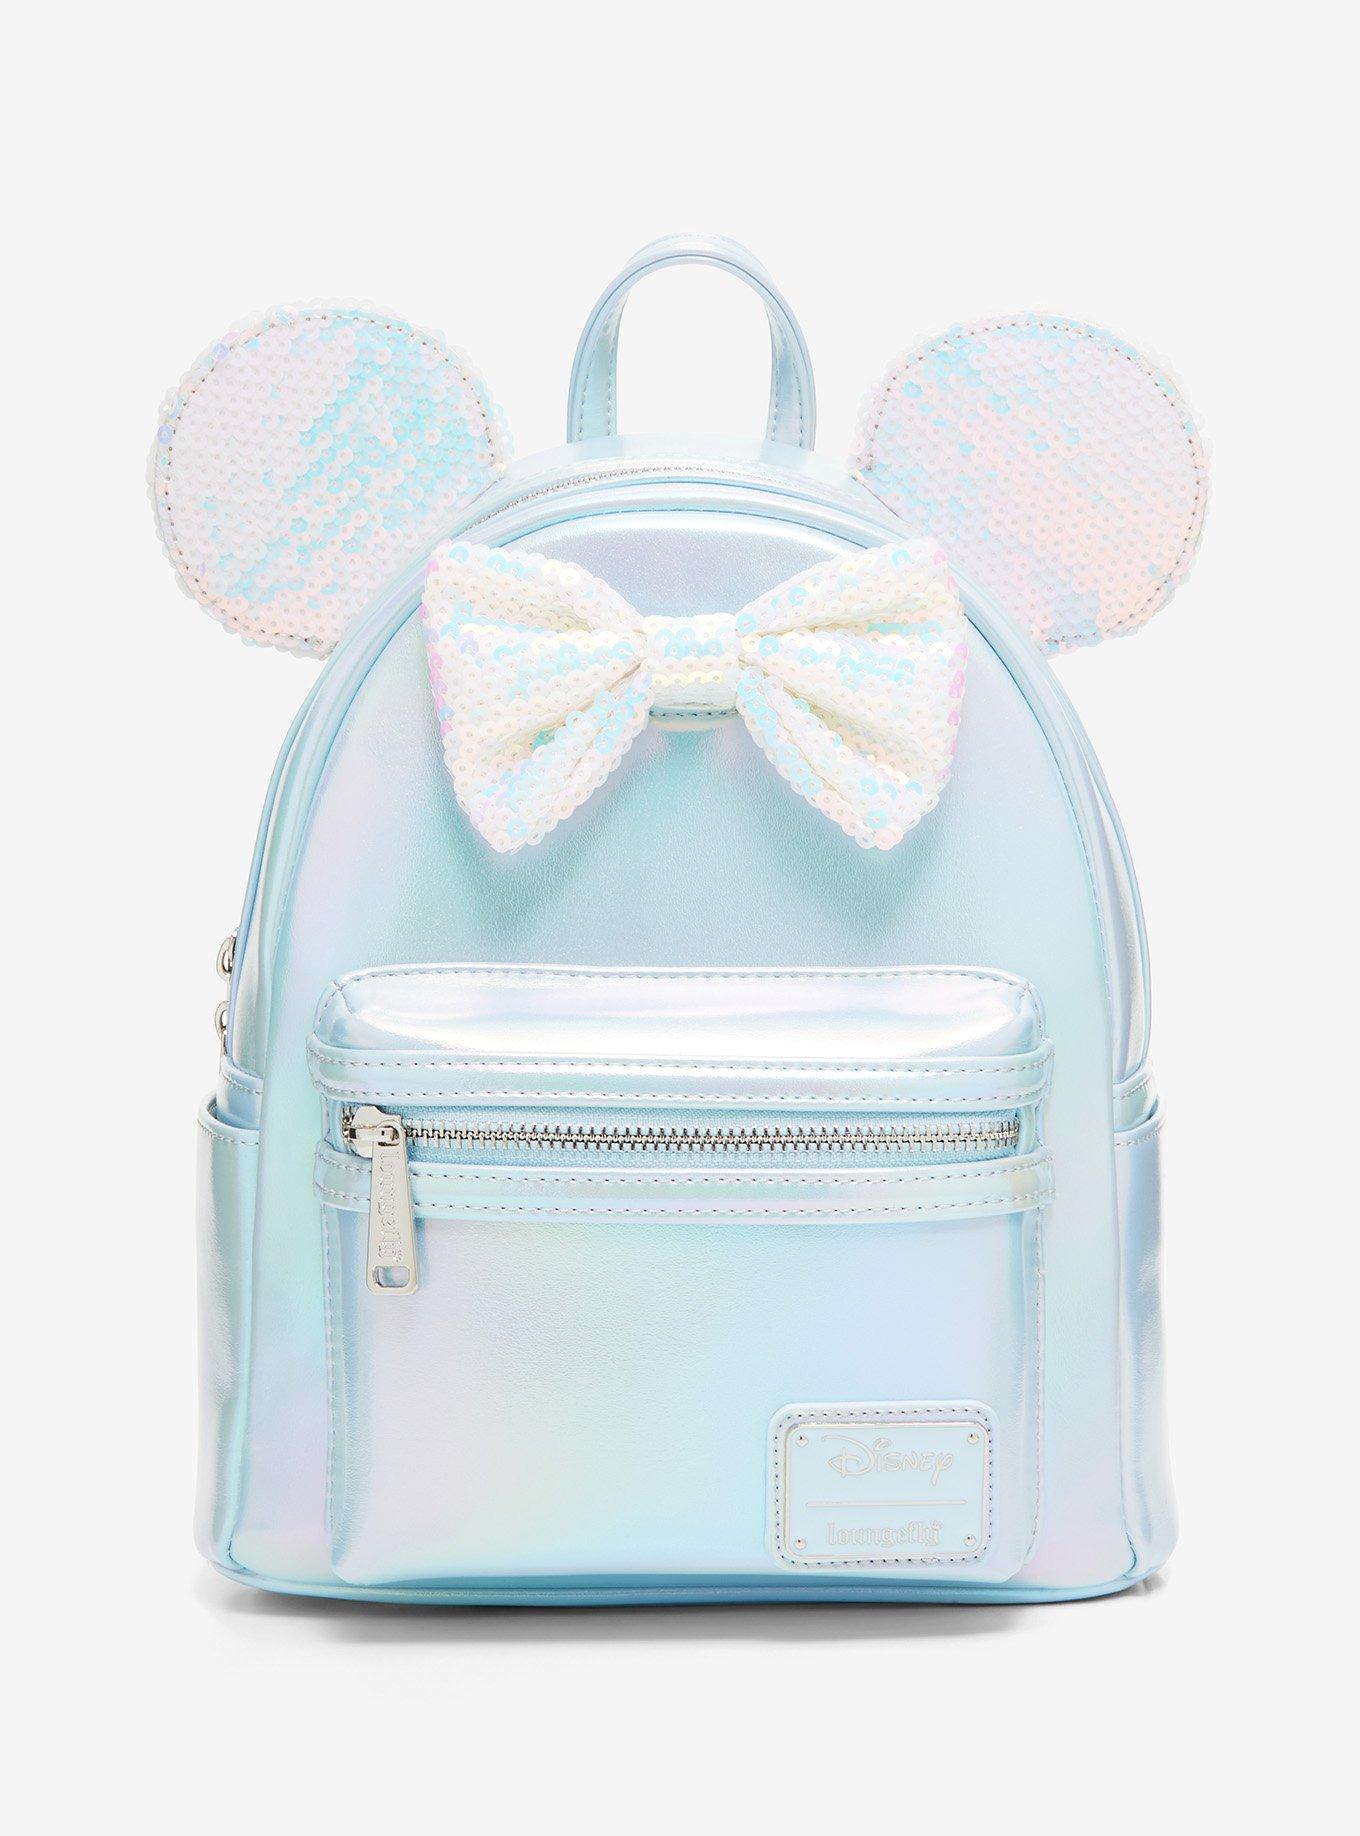 Loungefly Disney Minnie Mouse Sequin Bow Mini Backpack - BoxLunch